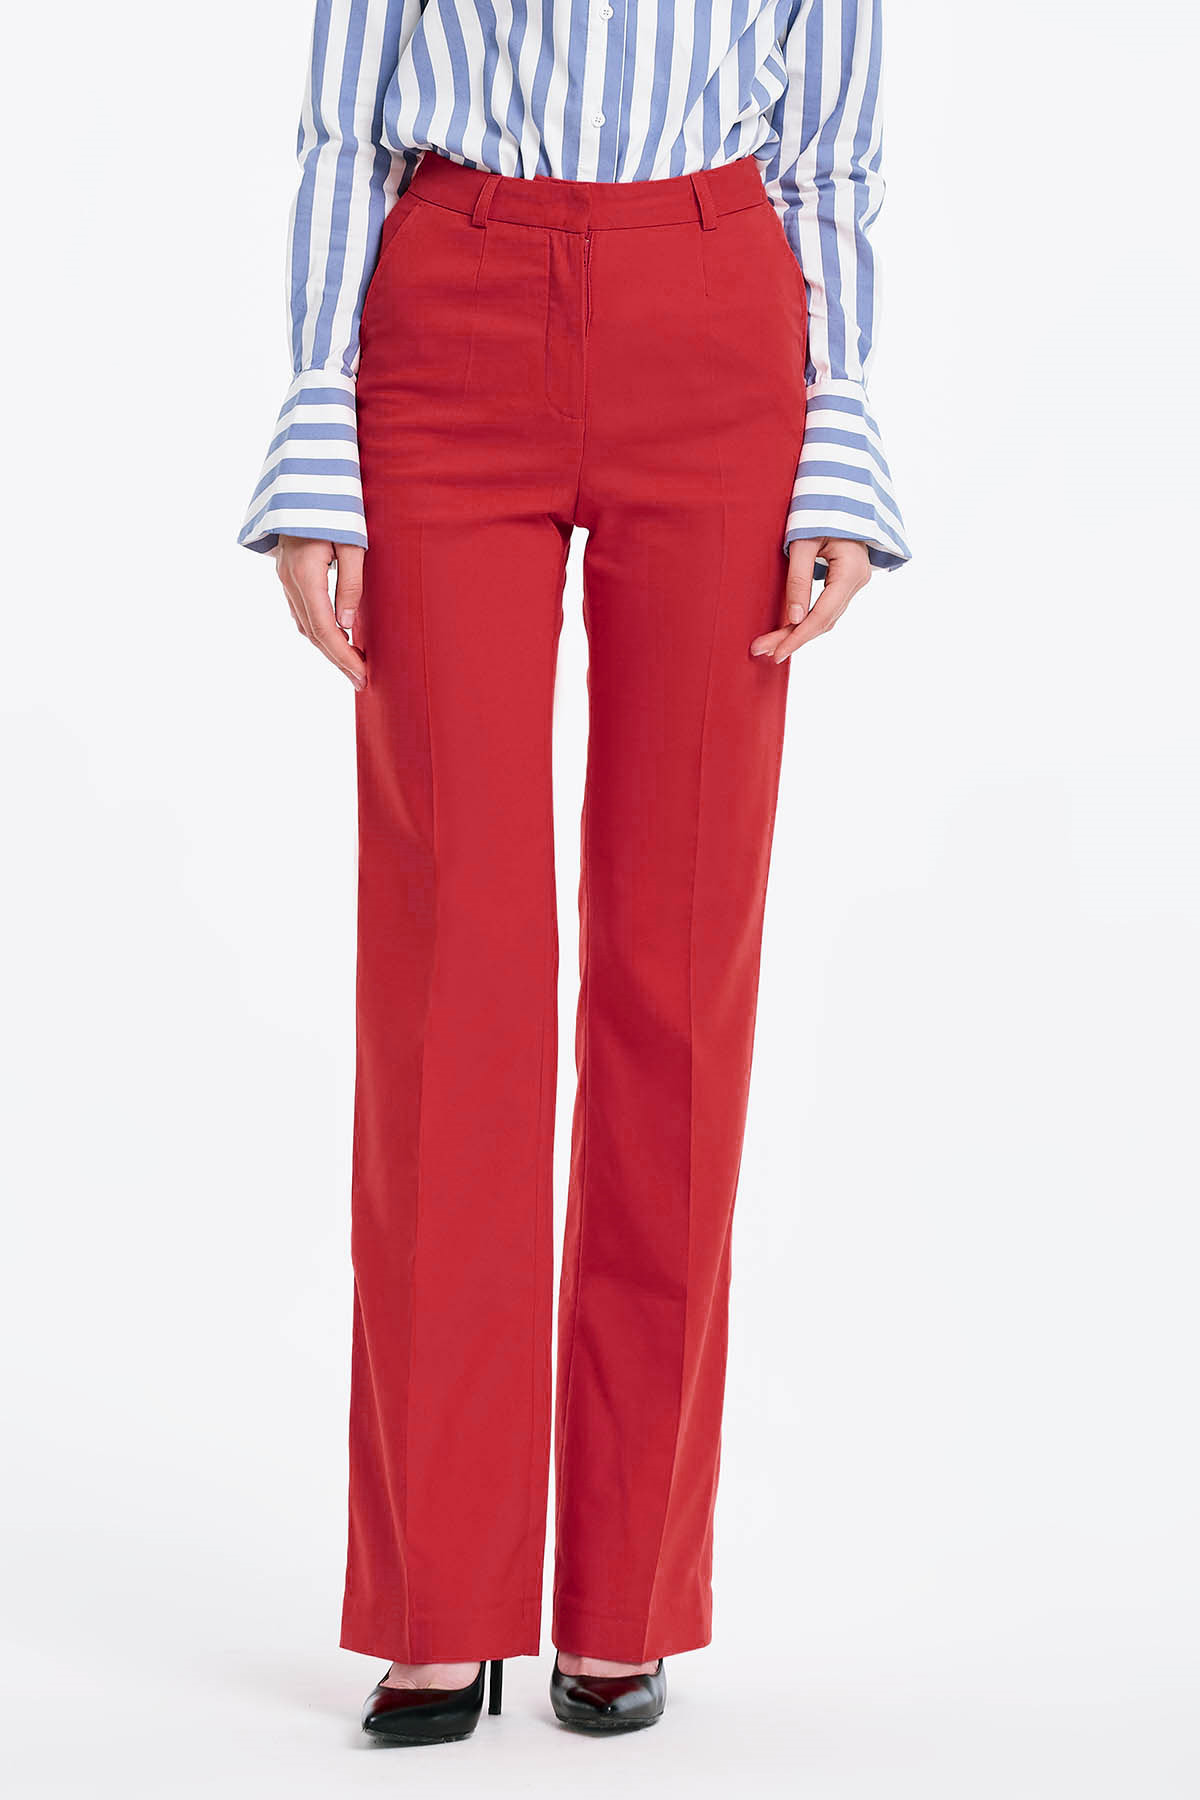 Red trousers, photo 1